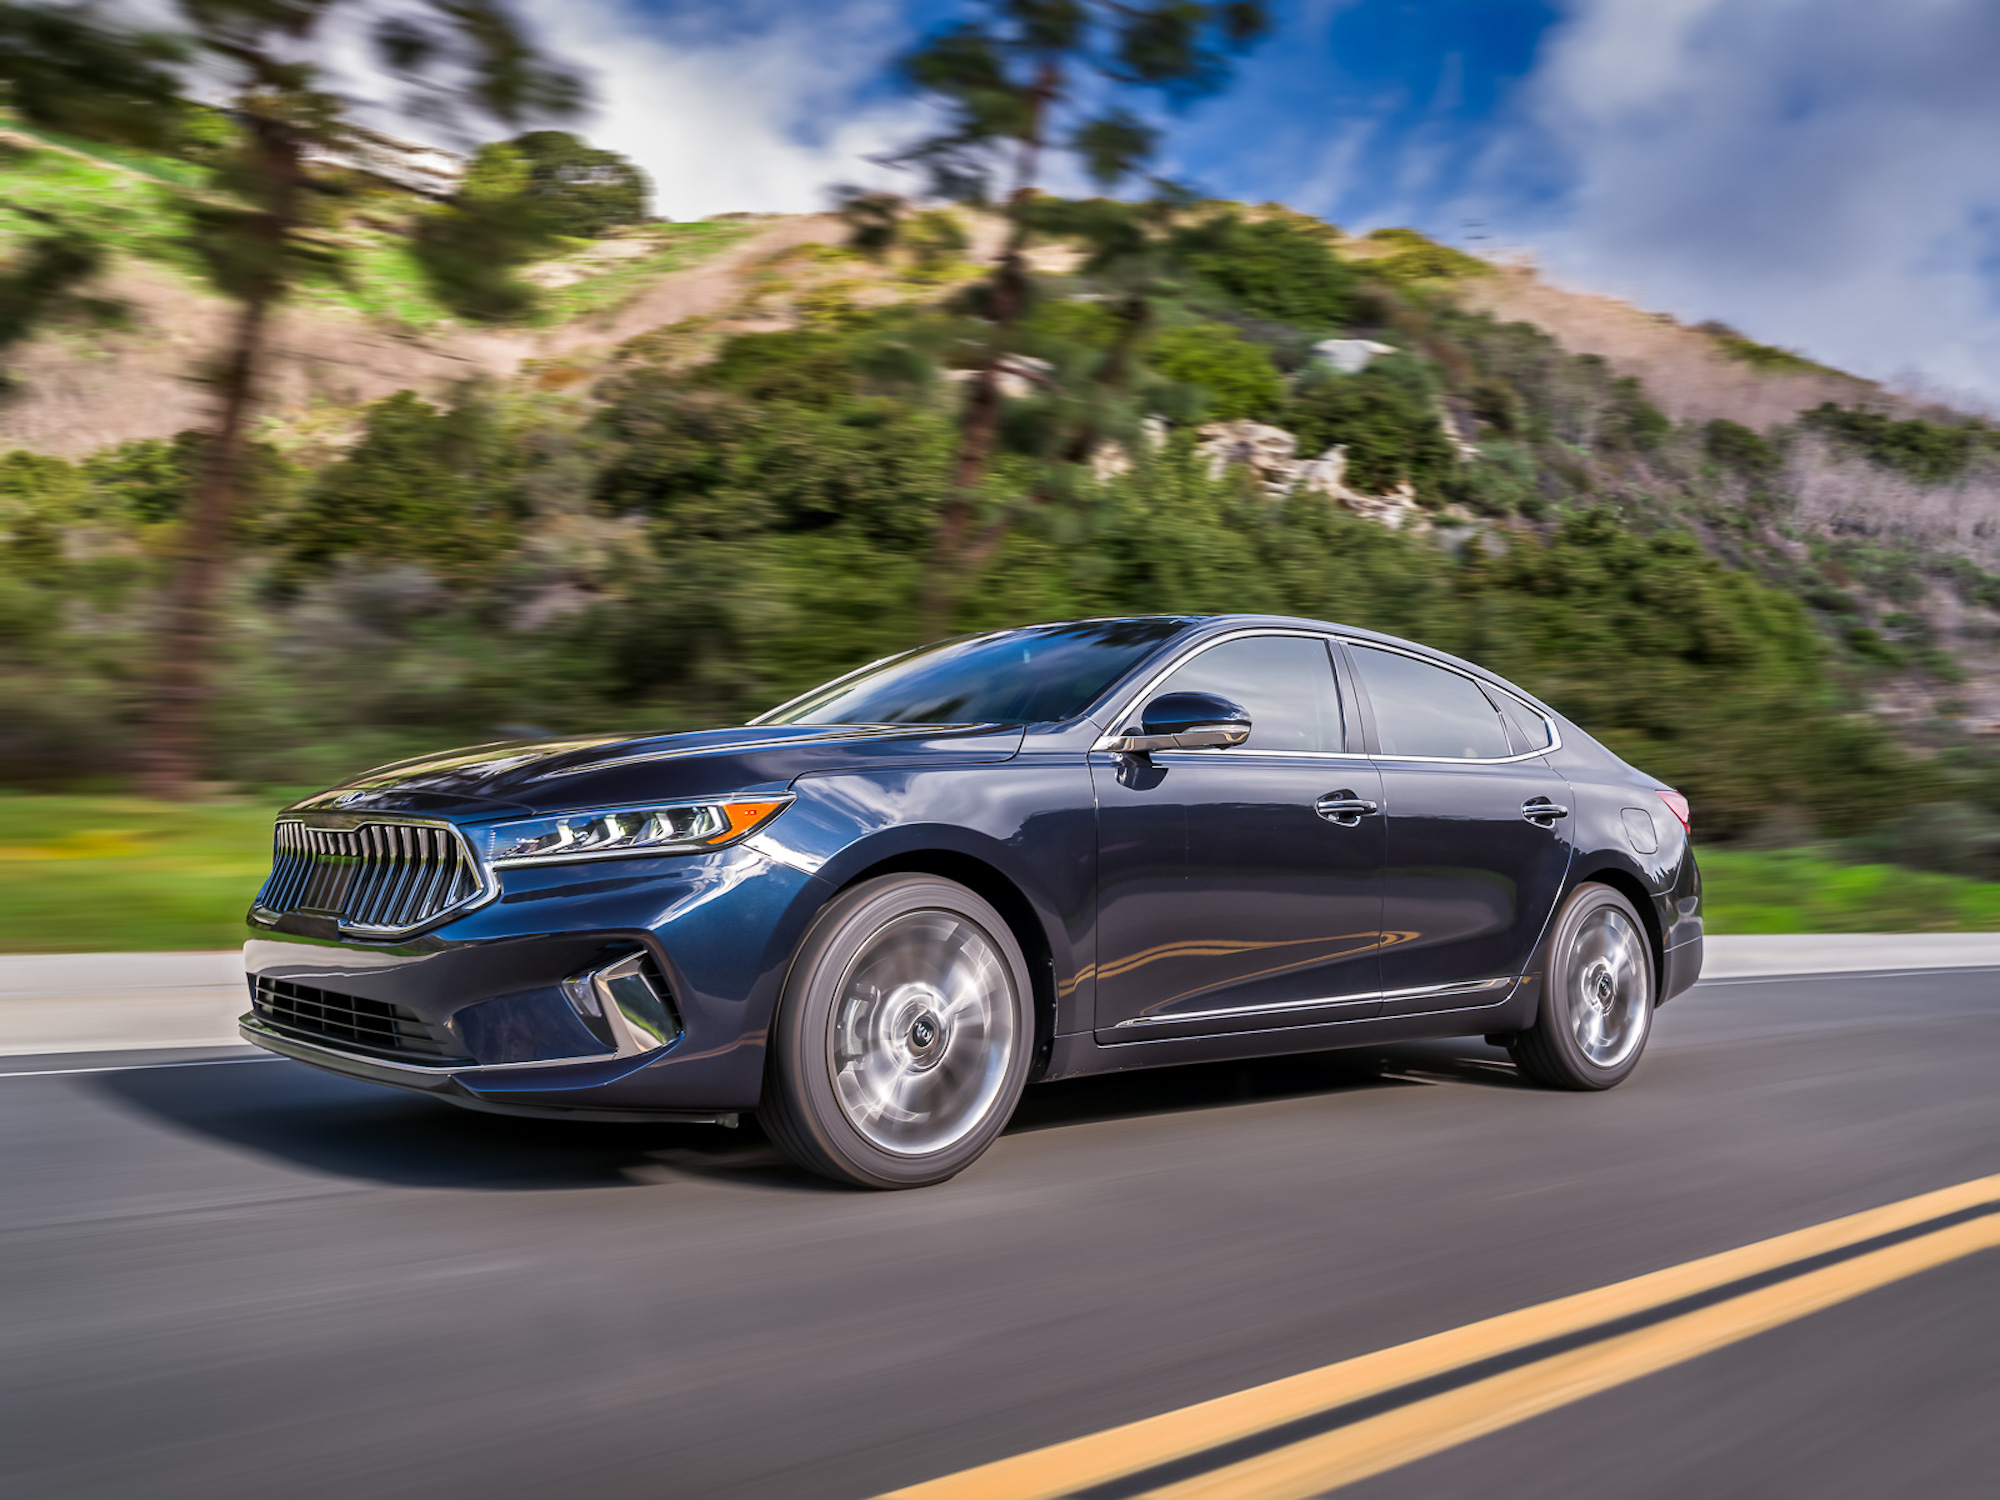 A dark-blue 2020 Kia Cadenza travels on a two-lane highway lined with pine trees and mountains